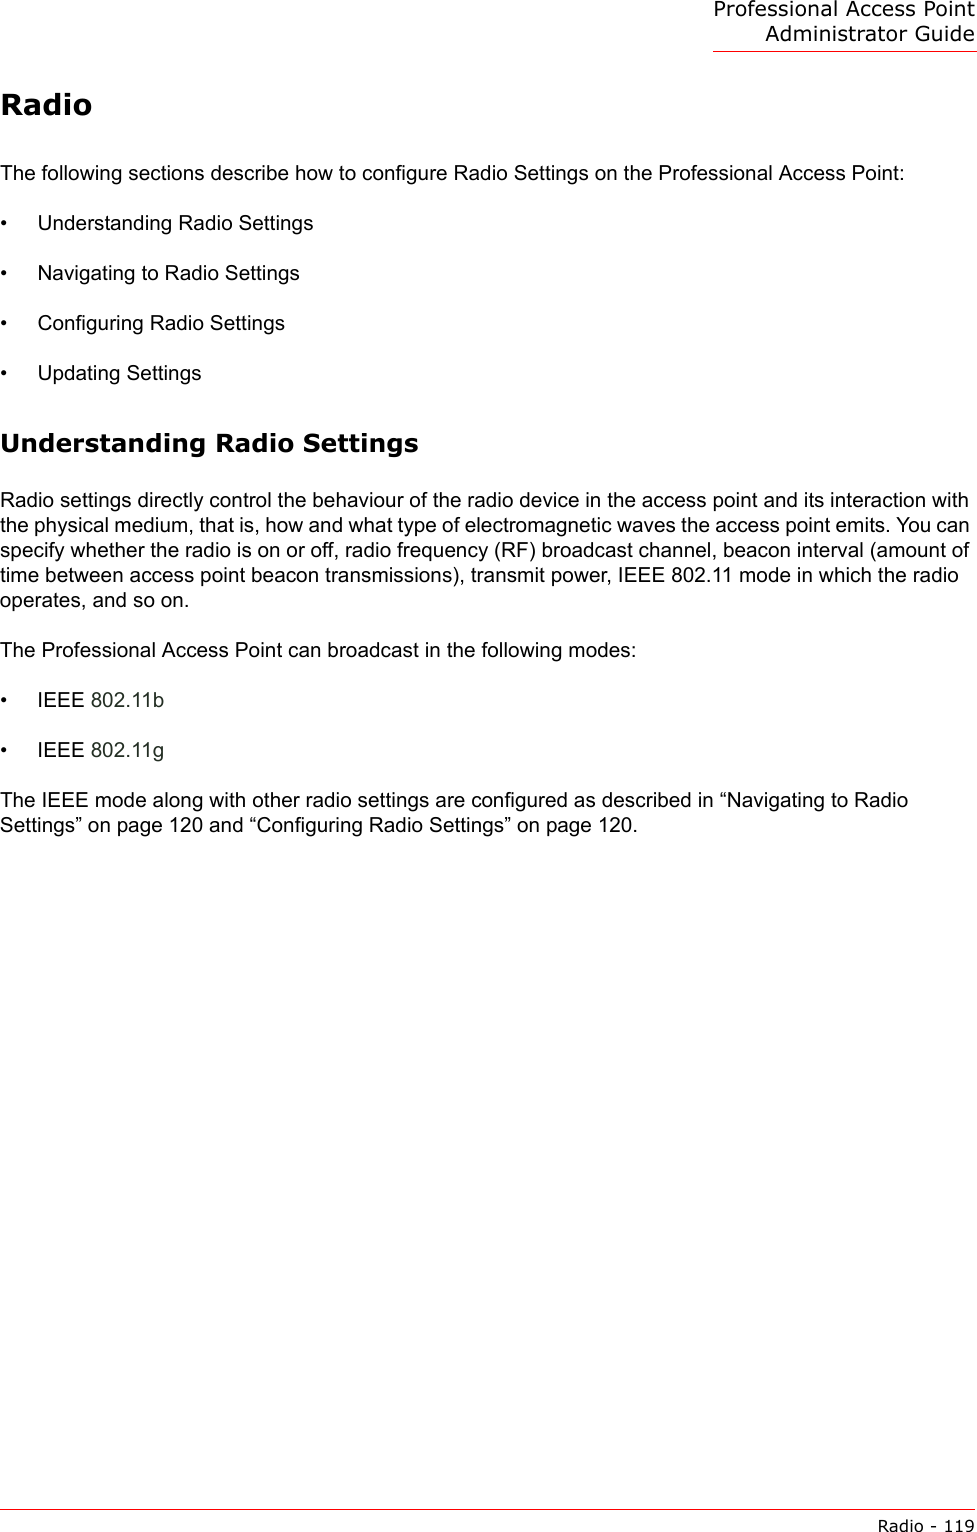 Professional Access Point Administrator GuideRadio - 119RadioThe following sections describe how to configure Radio Settings on the Professional Access Point:•Understanding Radio Settings•Navigating to Radio Settings•Configuring Radio Settings•Updating SettingsUnderstanding Radio SettingsRadio settings directly control the behaviour of the radio device in the access point and its interaction with the physical medium, that is, how and what type of electromagnetic waves the access point emits. You can specify whether the radio is on or off, radio frequency (RF) broadcast channel, beacon interval (amount of time between access point beacon transmissions), transmit power, IEEE 802.11 mode in which the radio operates, and so on.The Professional Access Point can broadcast in the following modes:• IEEE 802.11b• IEEE 802.11gThe IEEE mode along with other radio settings are configured as described in “Navigating to Radio Settings” on page 120 and “Configuring Radio Settings” on page 120.